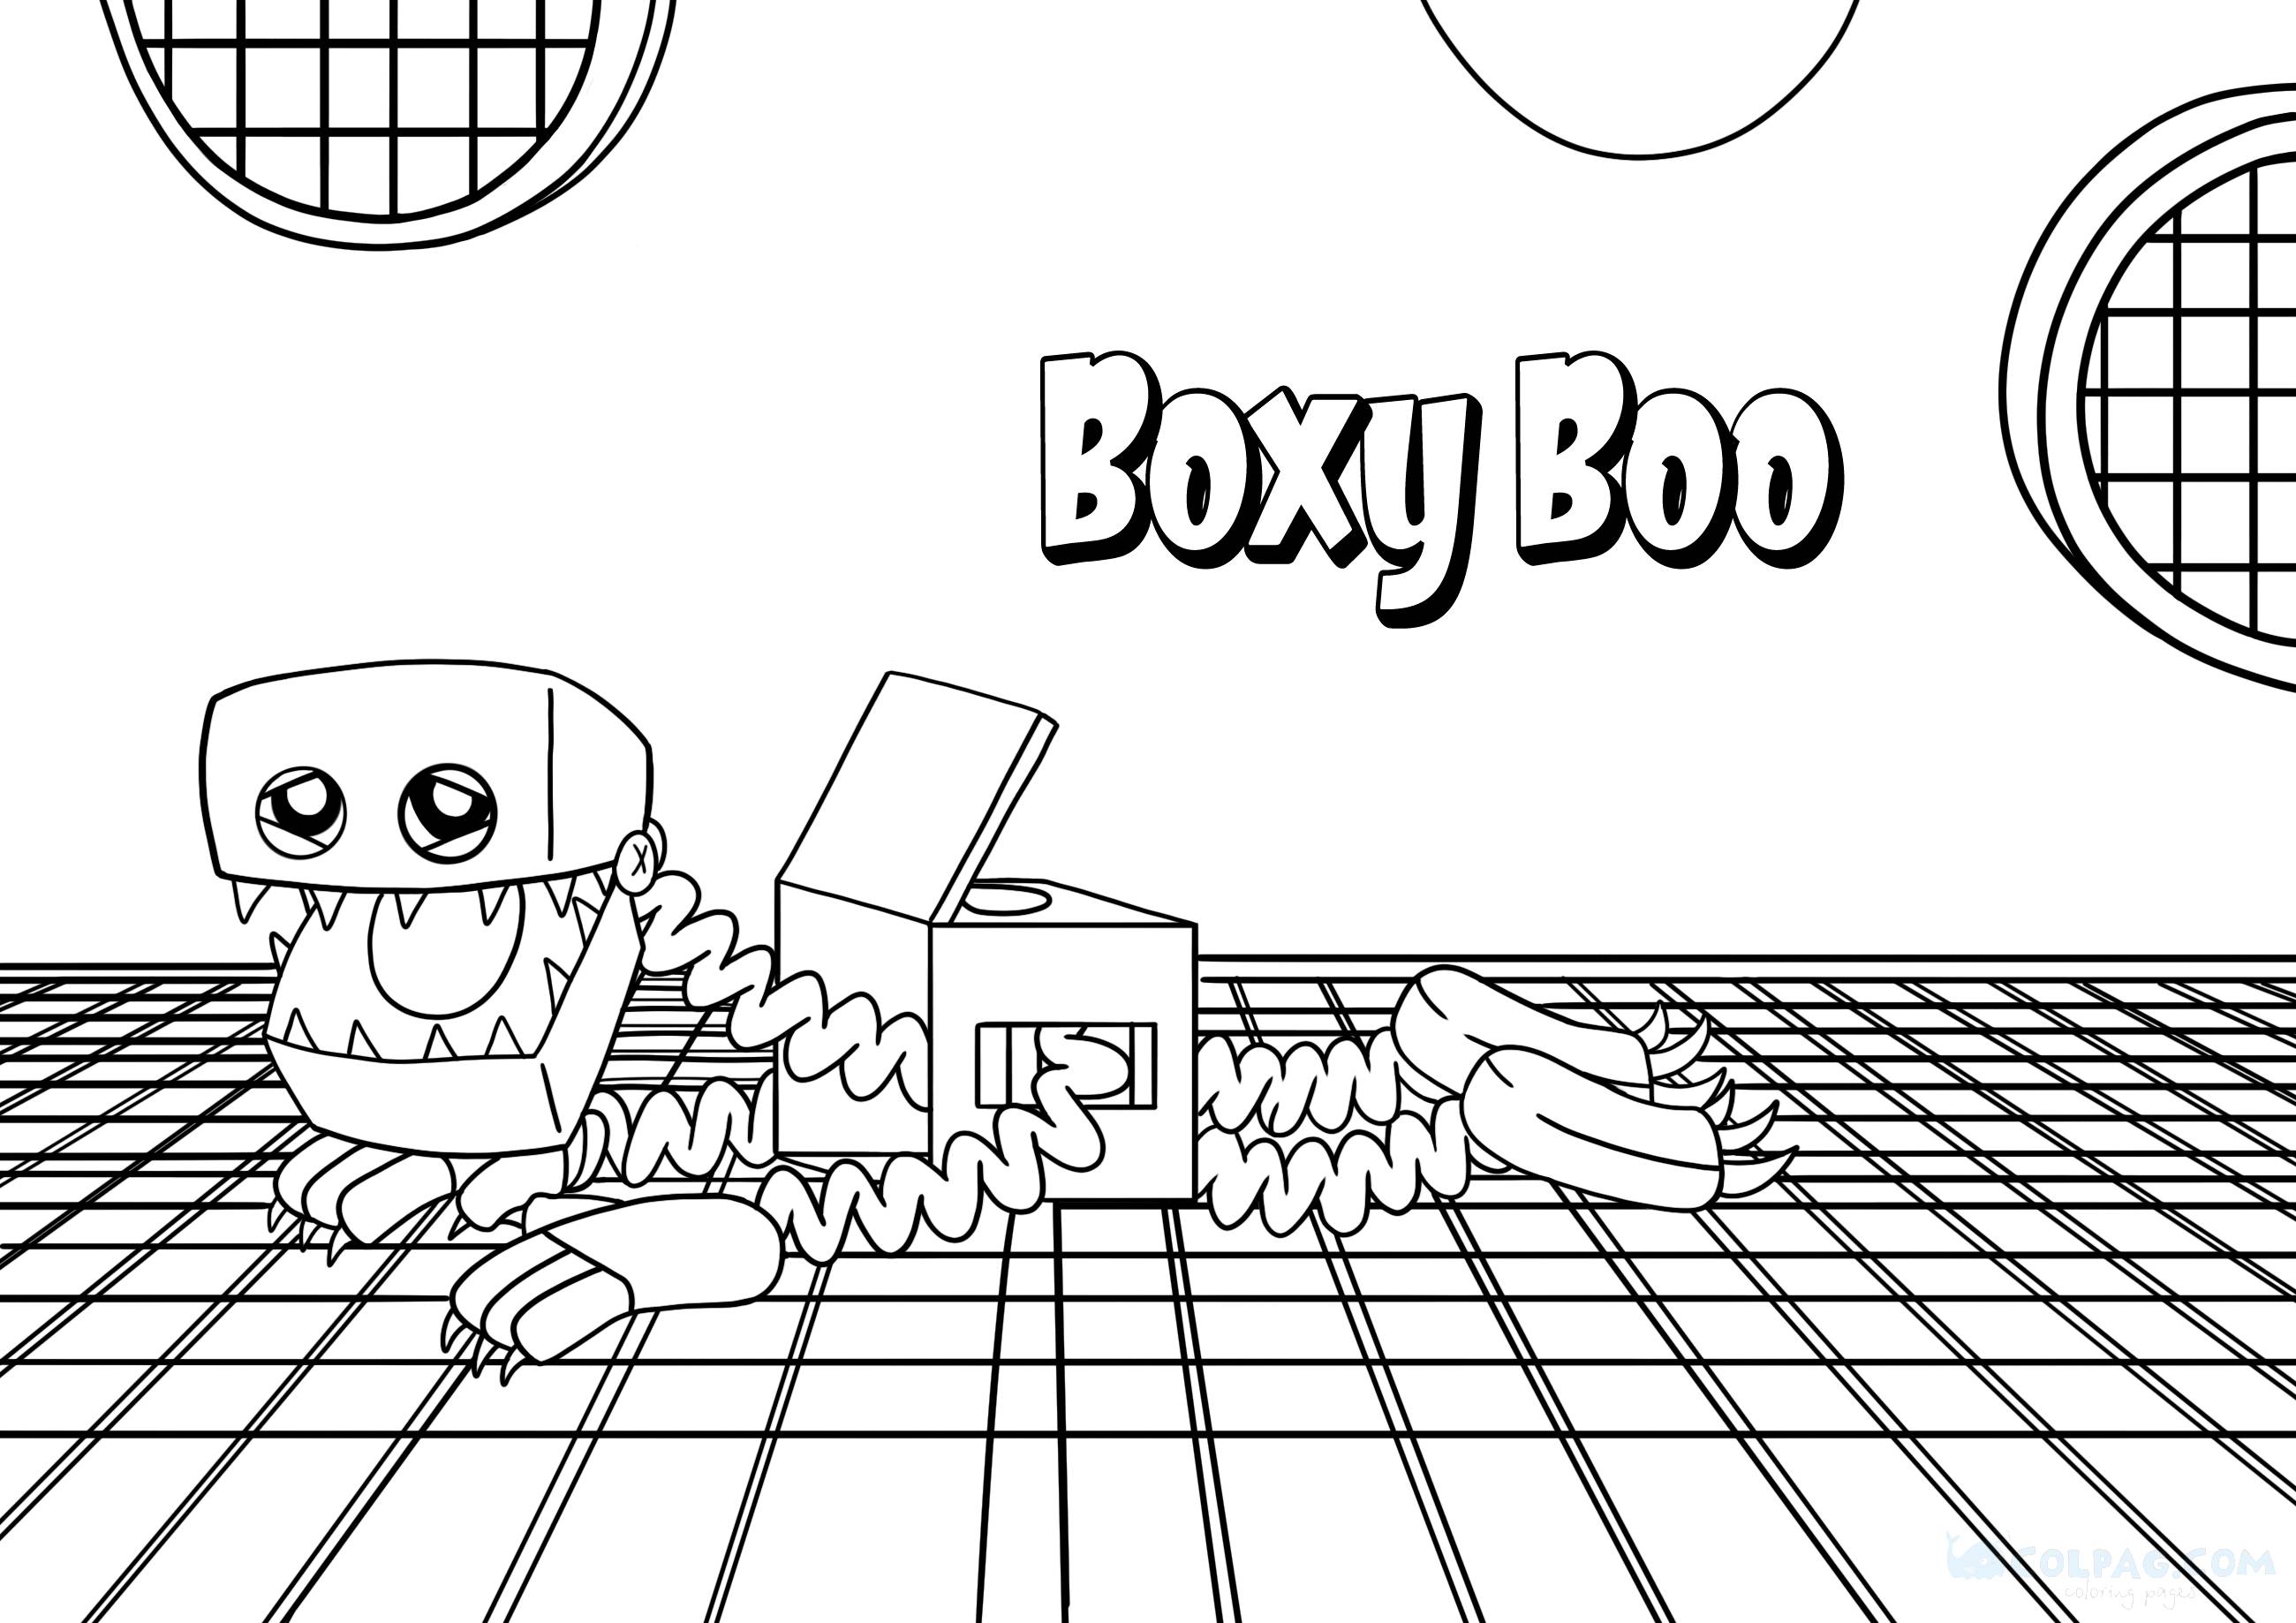 Boxy Boo Coloring Pages (Project: Playtime)